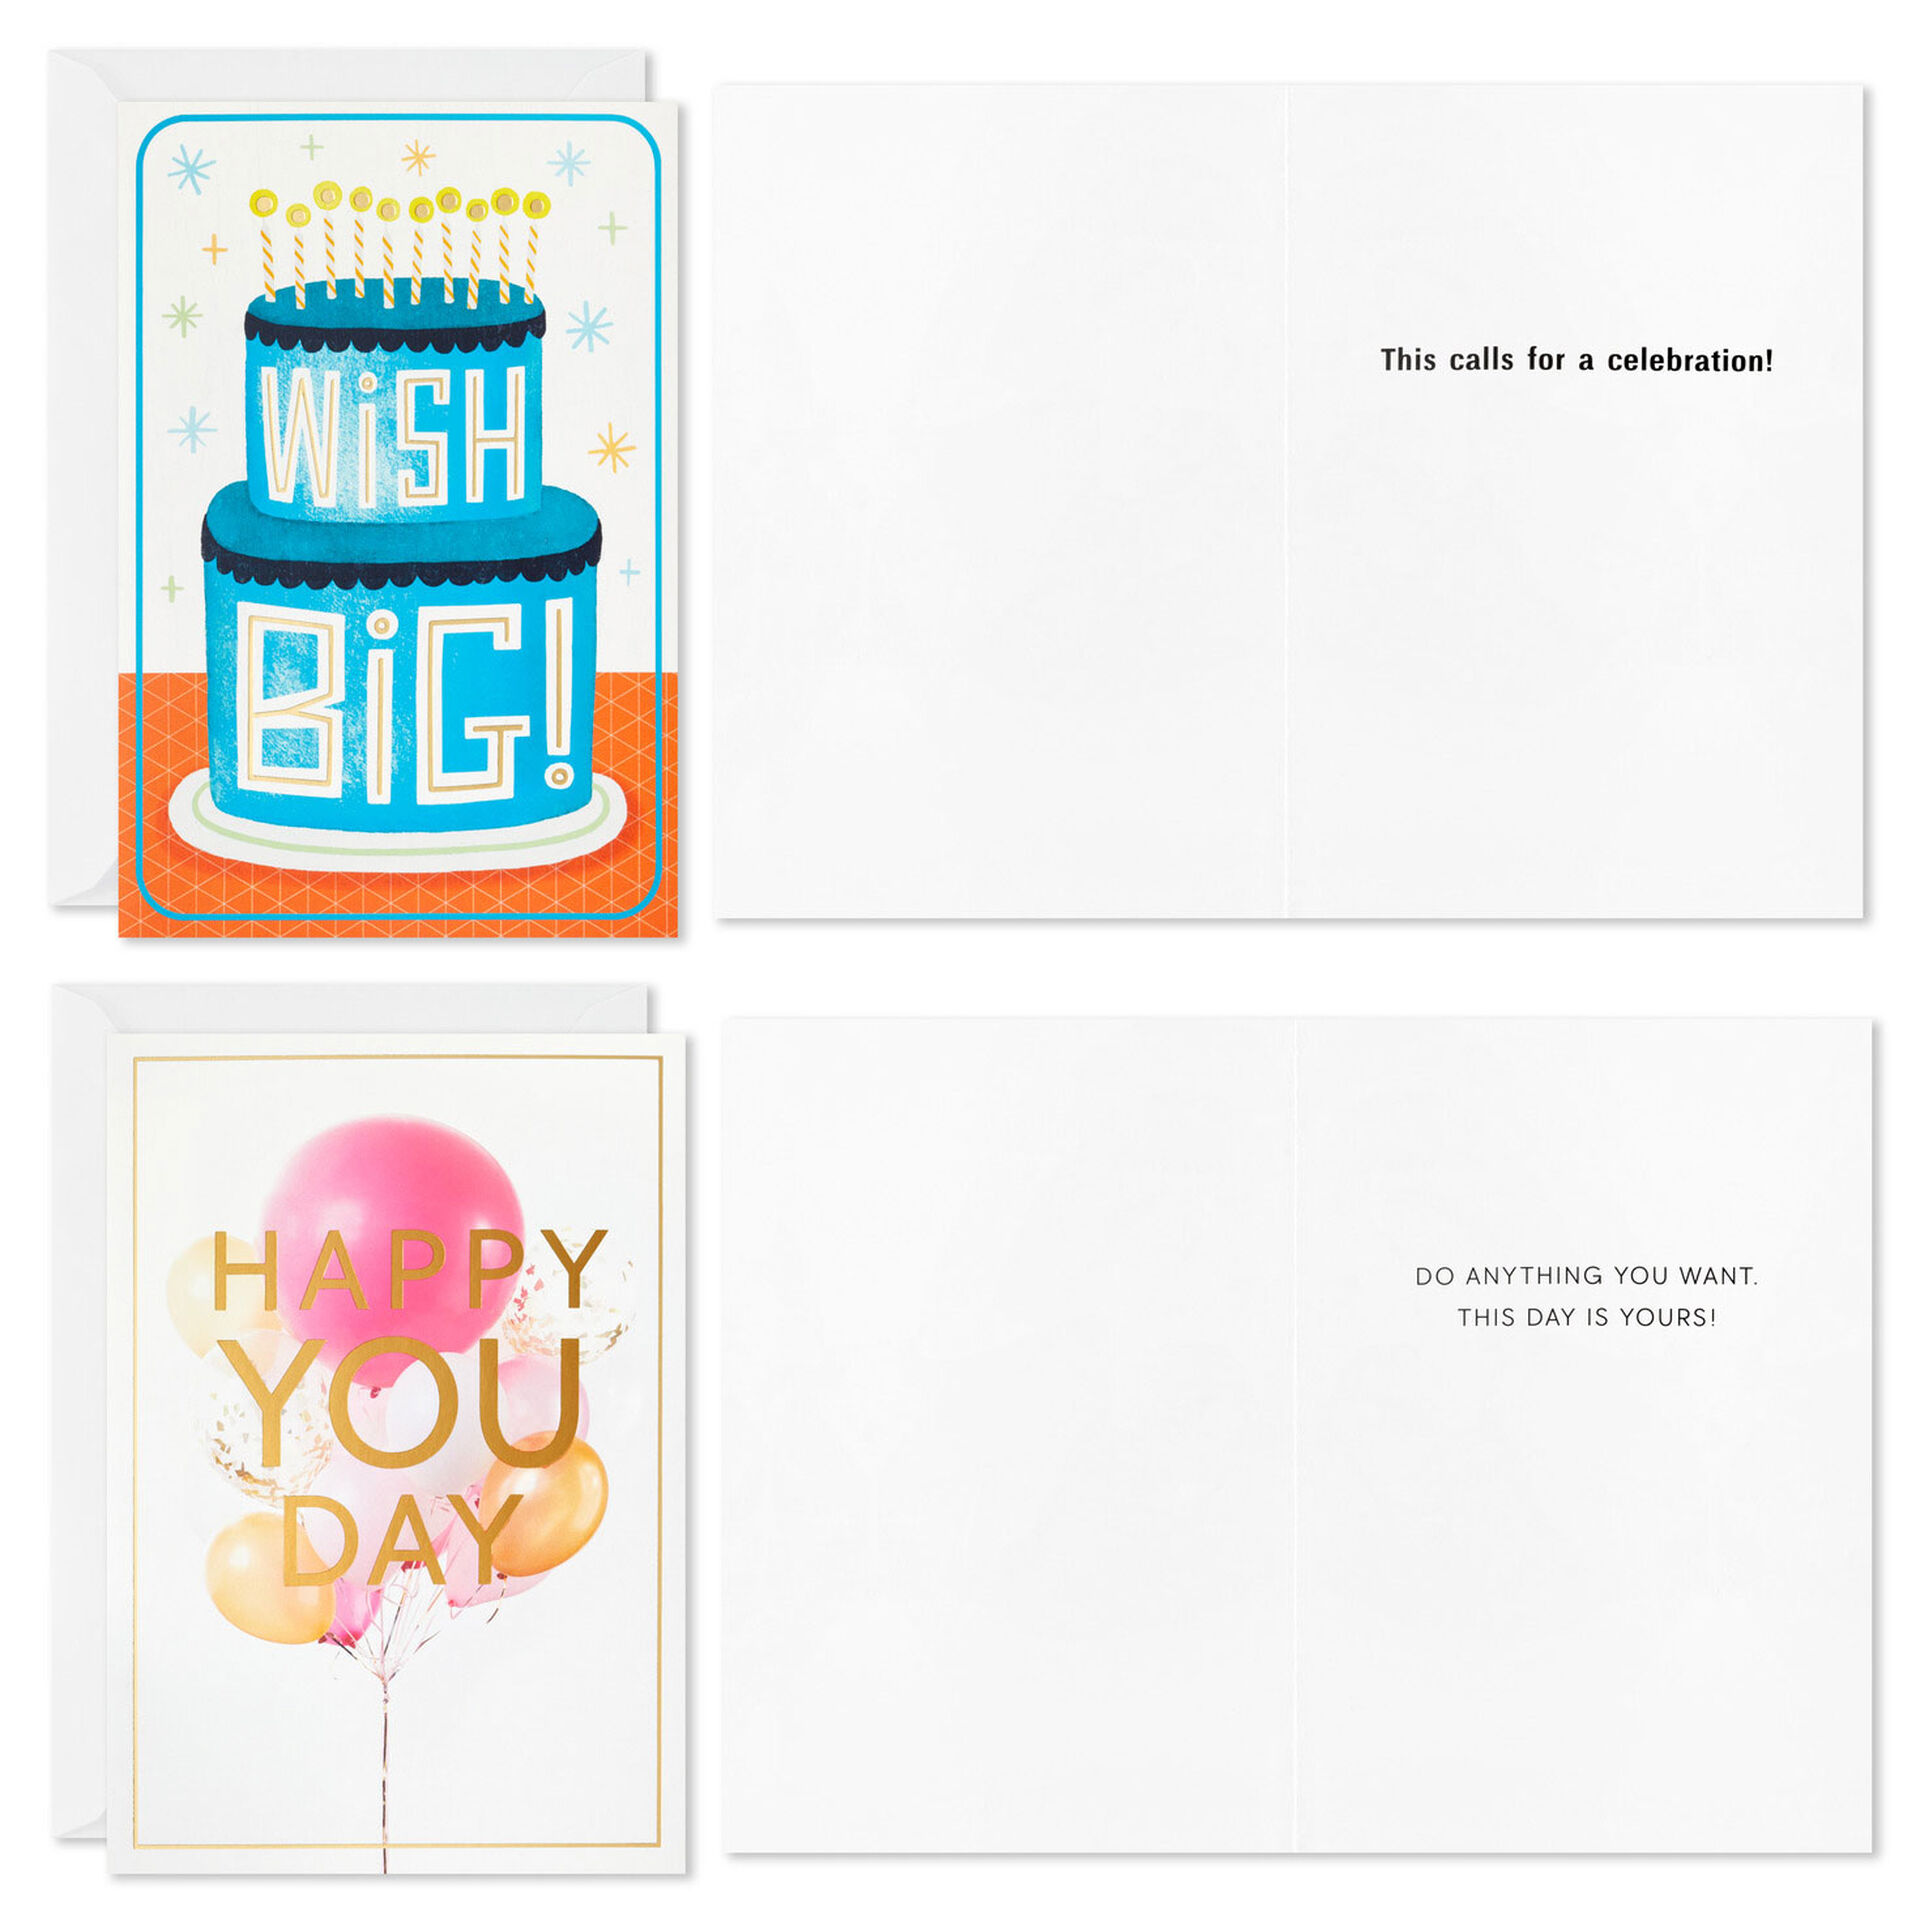 Celebrate-Assorted-Boxed-AllOccasion-Cards_3EDX1204_03